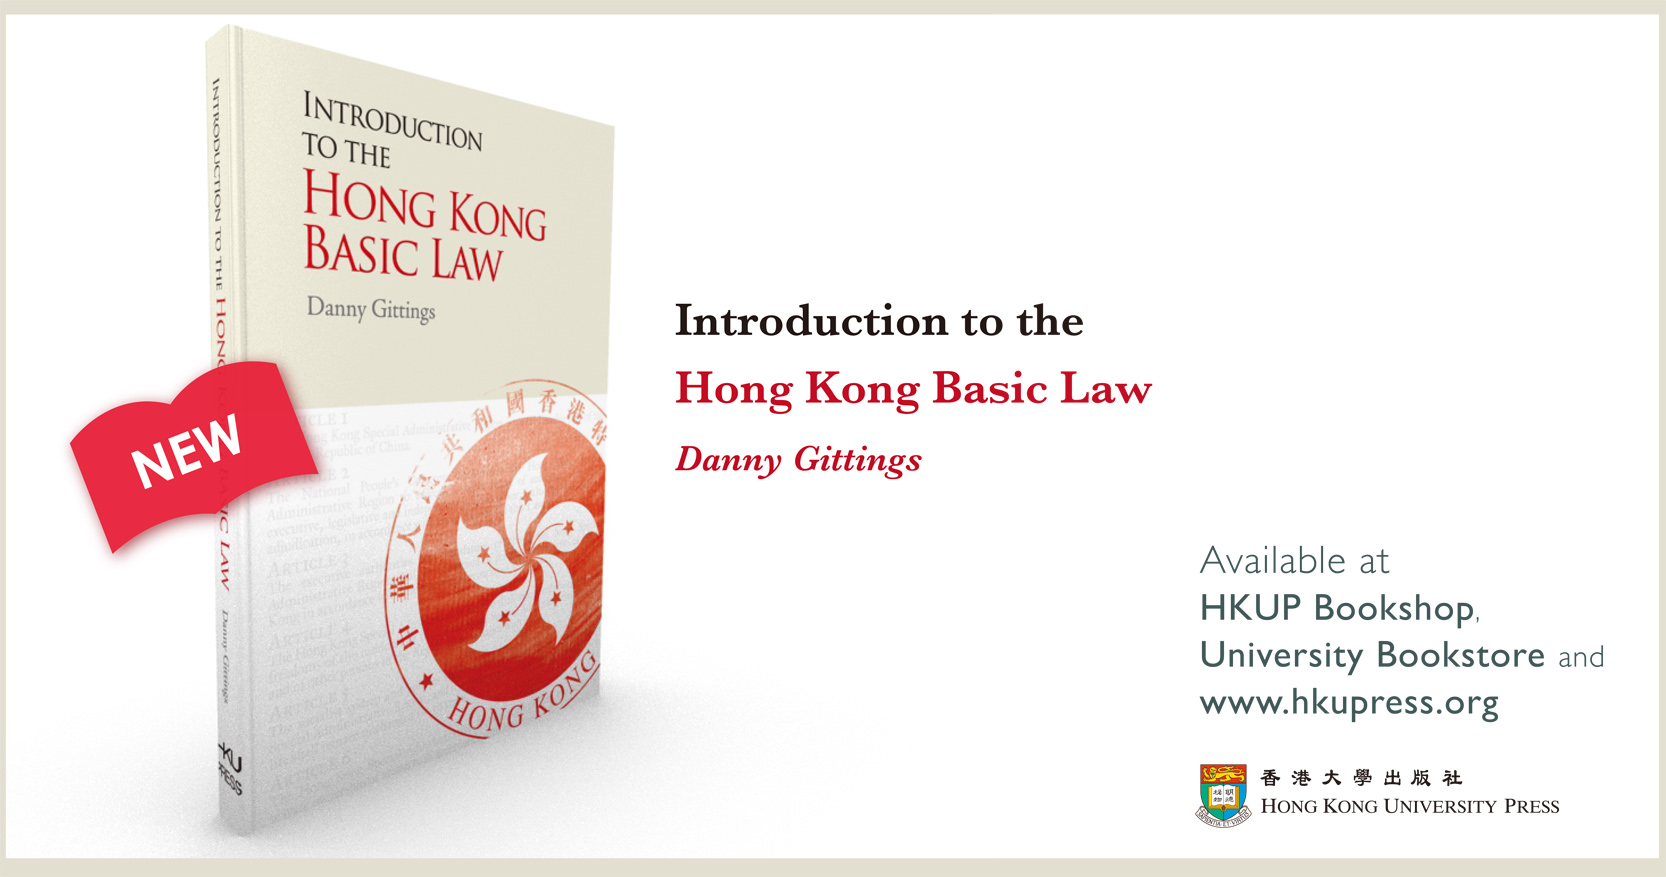 Danny Gittings has taught and examined thousands of students in courses on the HK Basic Law...